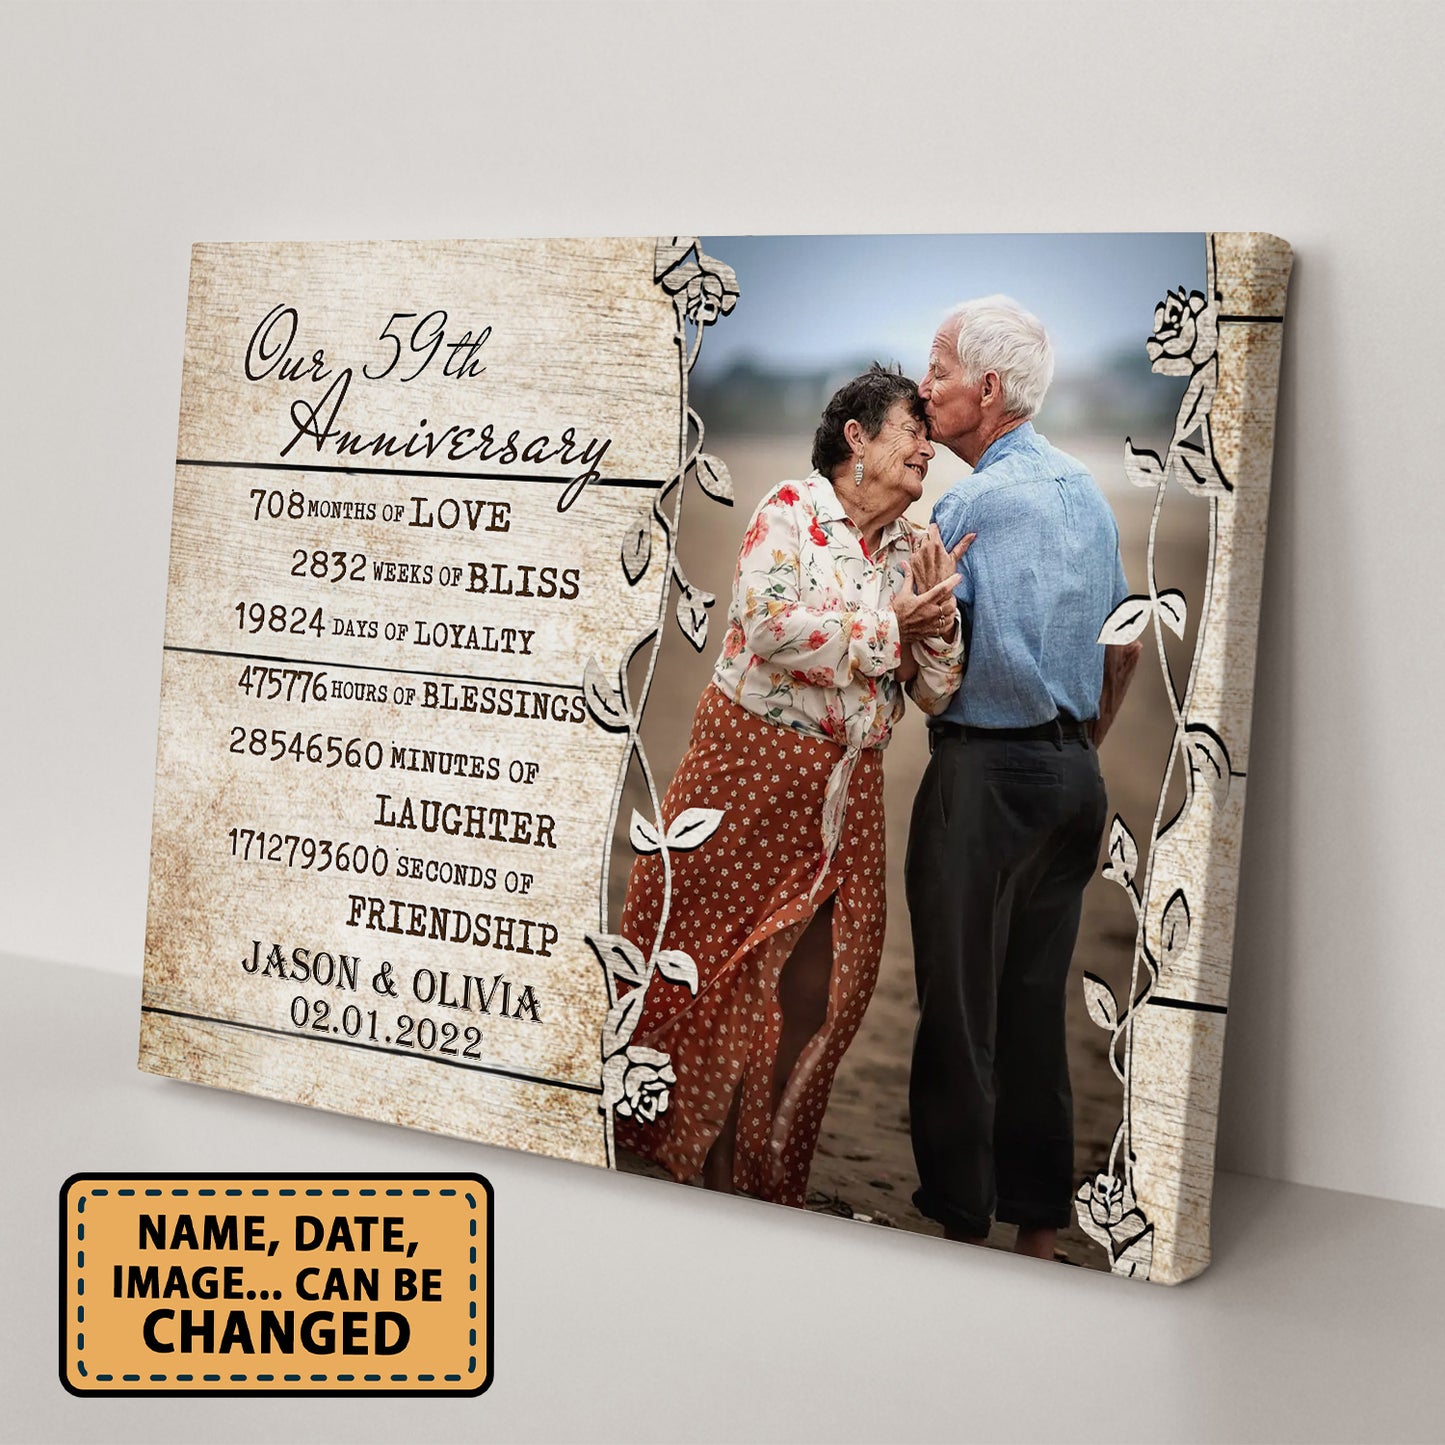 Our 59th Anniversary Timeless love Valentine Gift Personalized Canvas